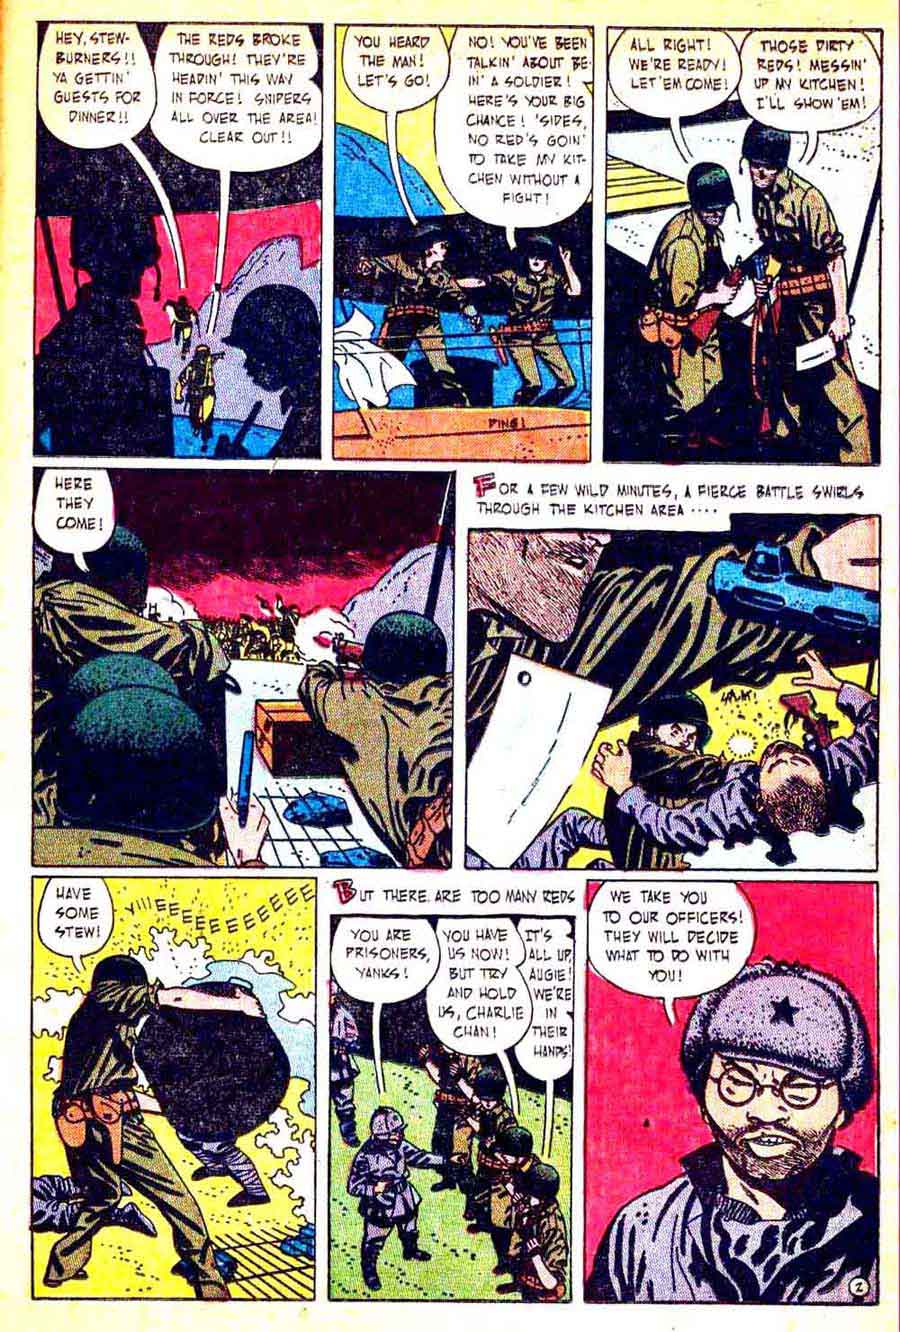 This is War v1 #6 standard comic book page art by Alex Toth